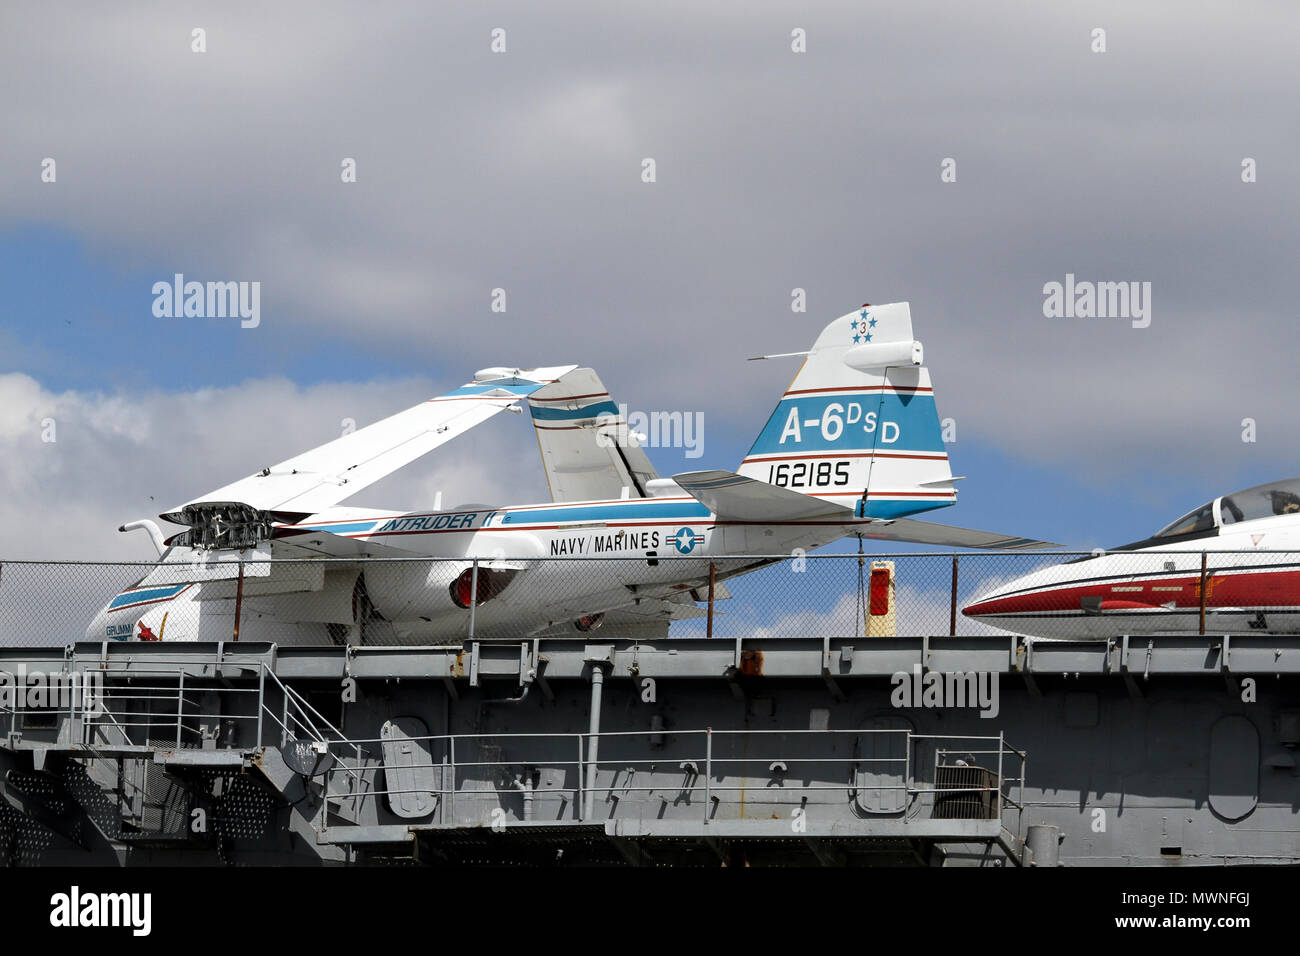 Planes on the aircraft carrier USS Intrepid, part of the Intrepid Sea, Air & Space Museum, Pier 86, Manhattan, New York City Stock Photo